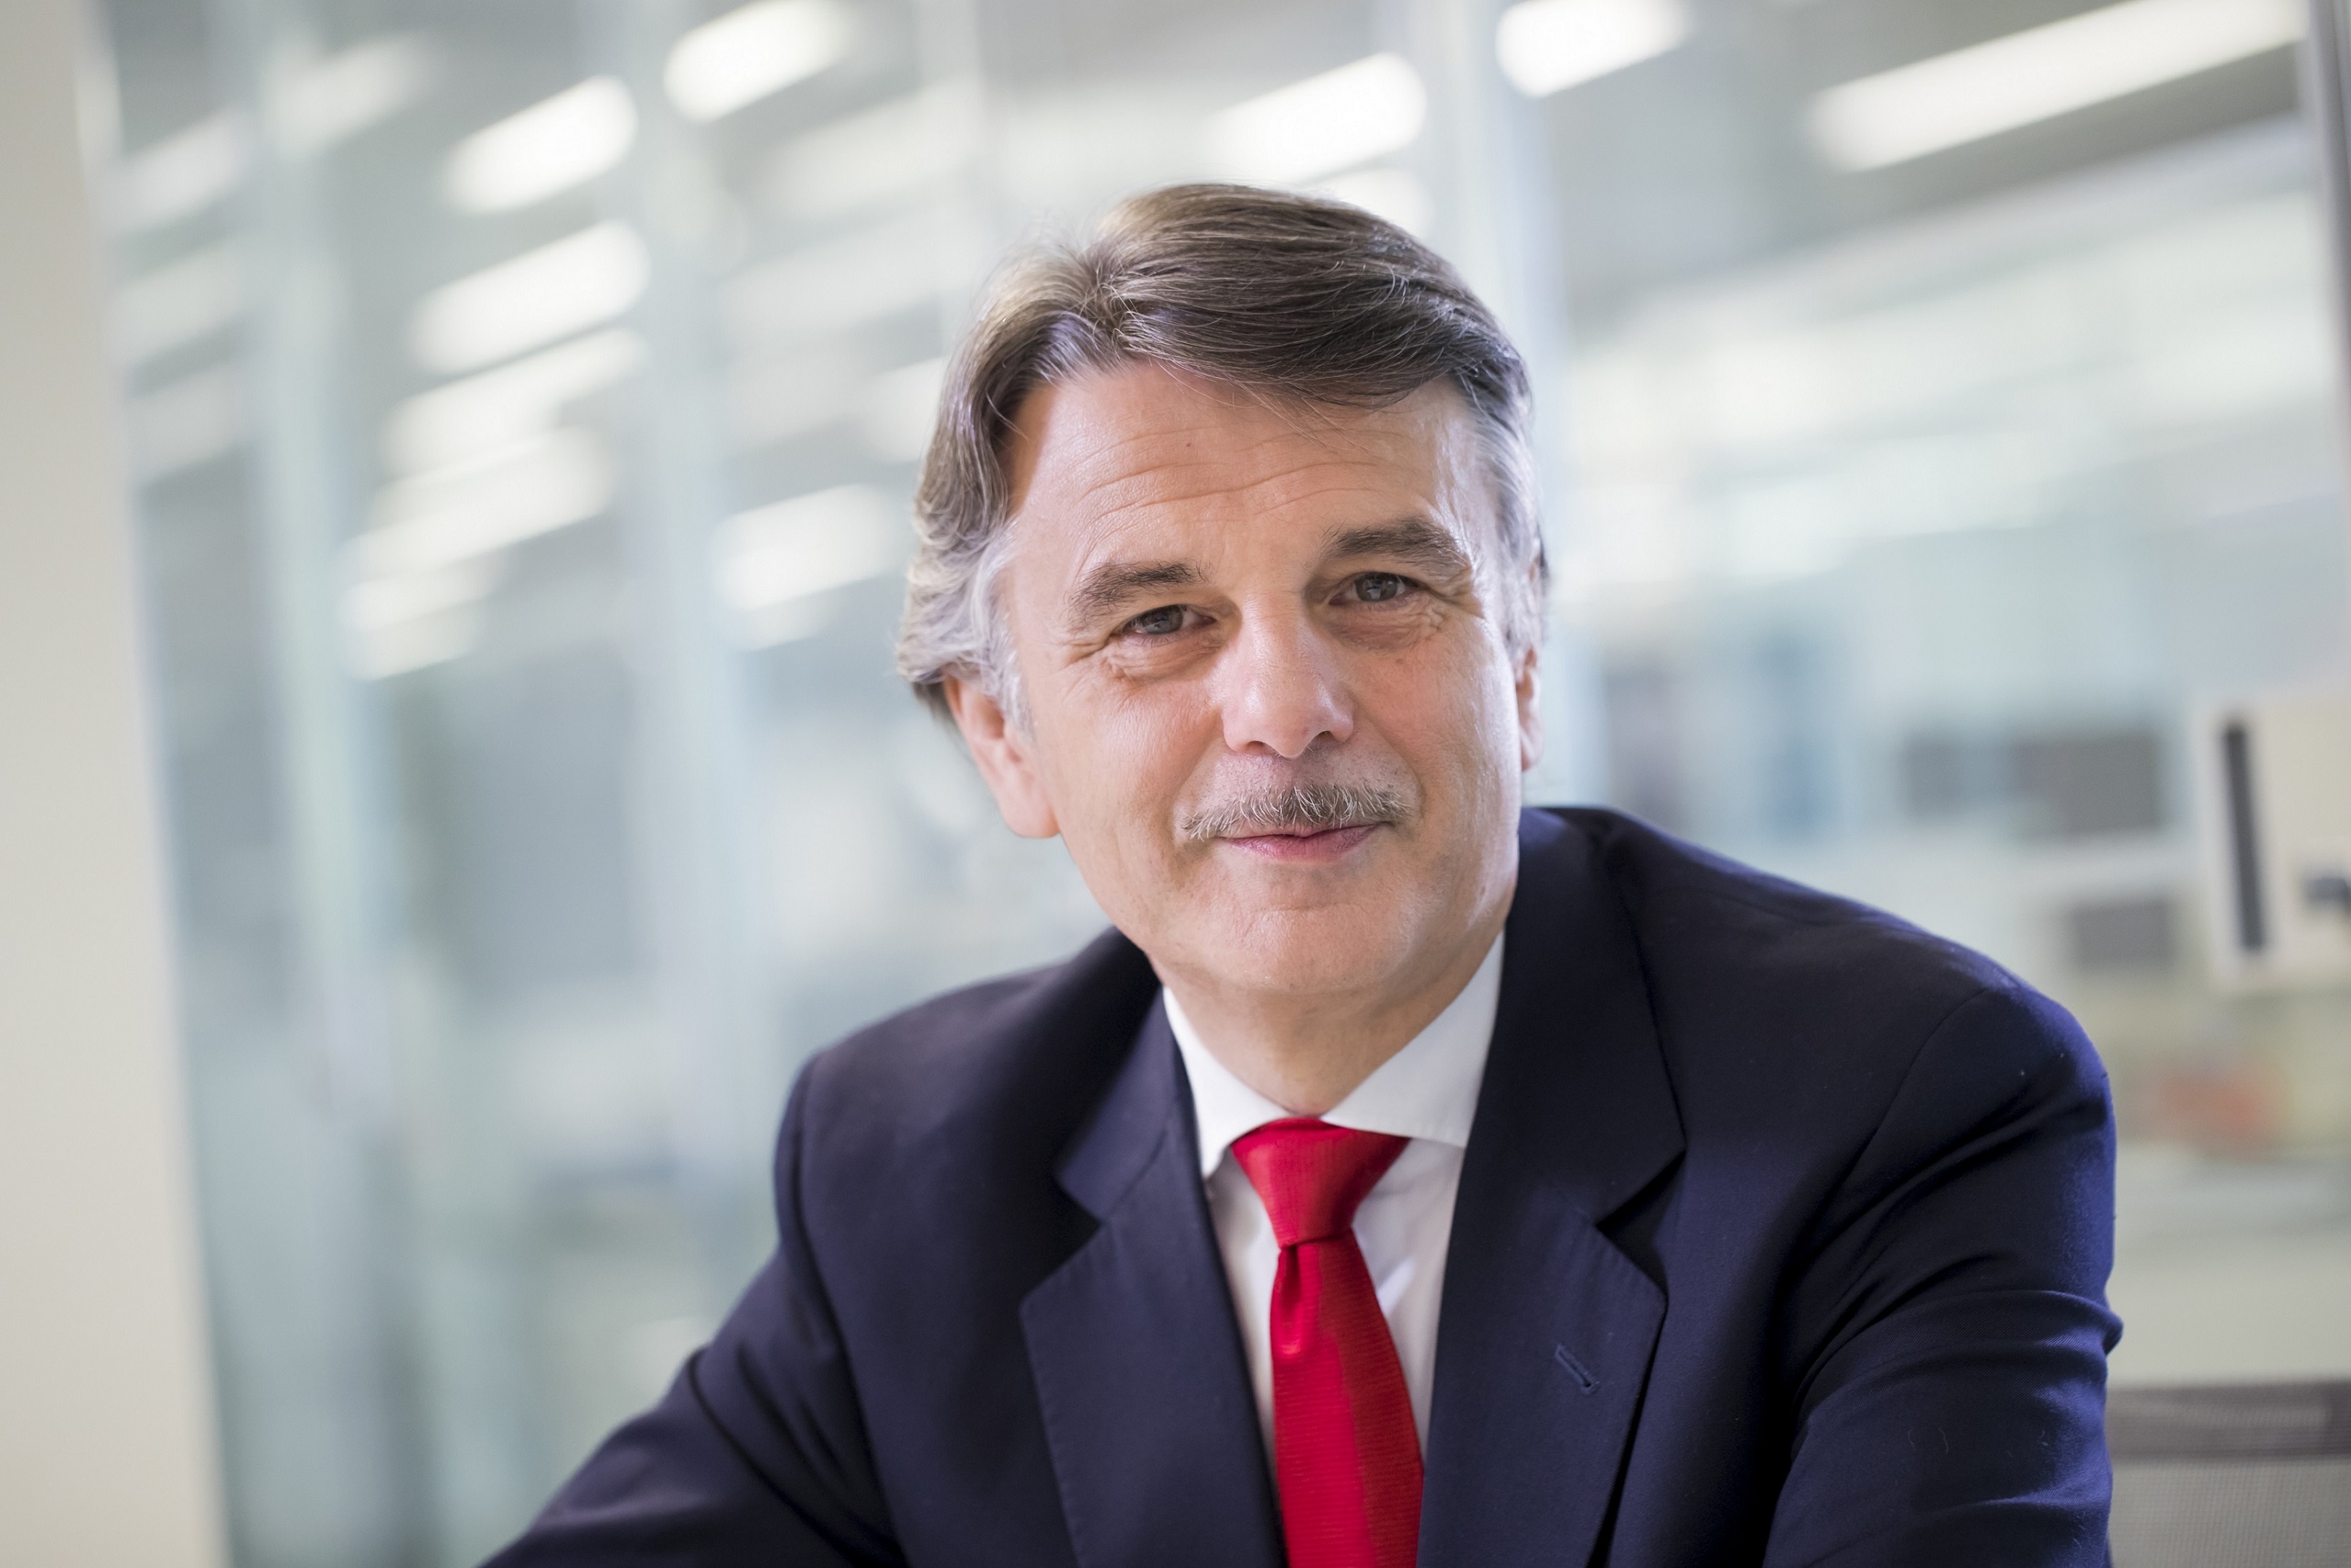 Ralf Speth Appointed as Non-Executive Vice-Chairman of Jaguar Land Rover